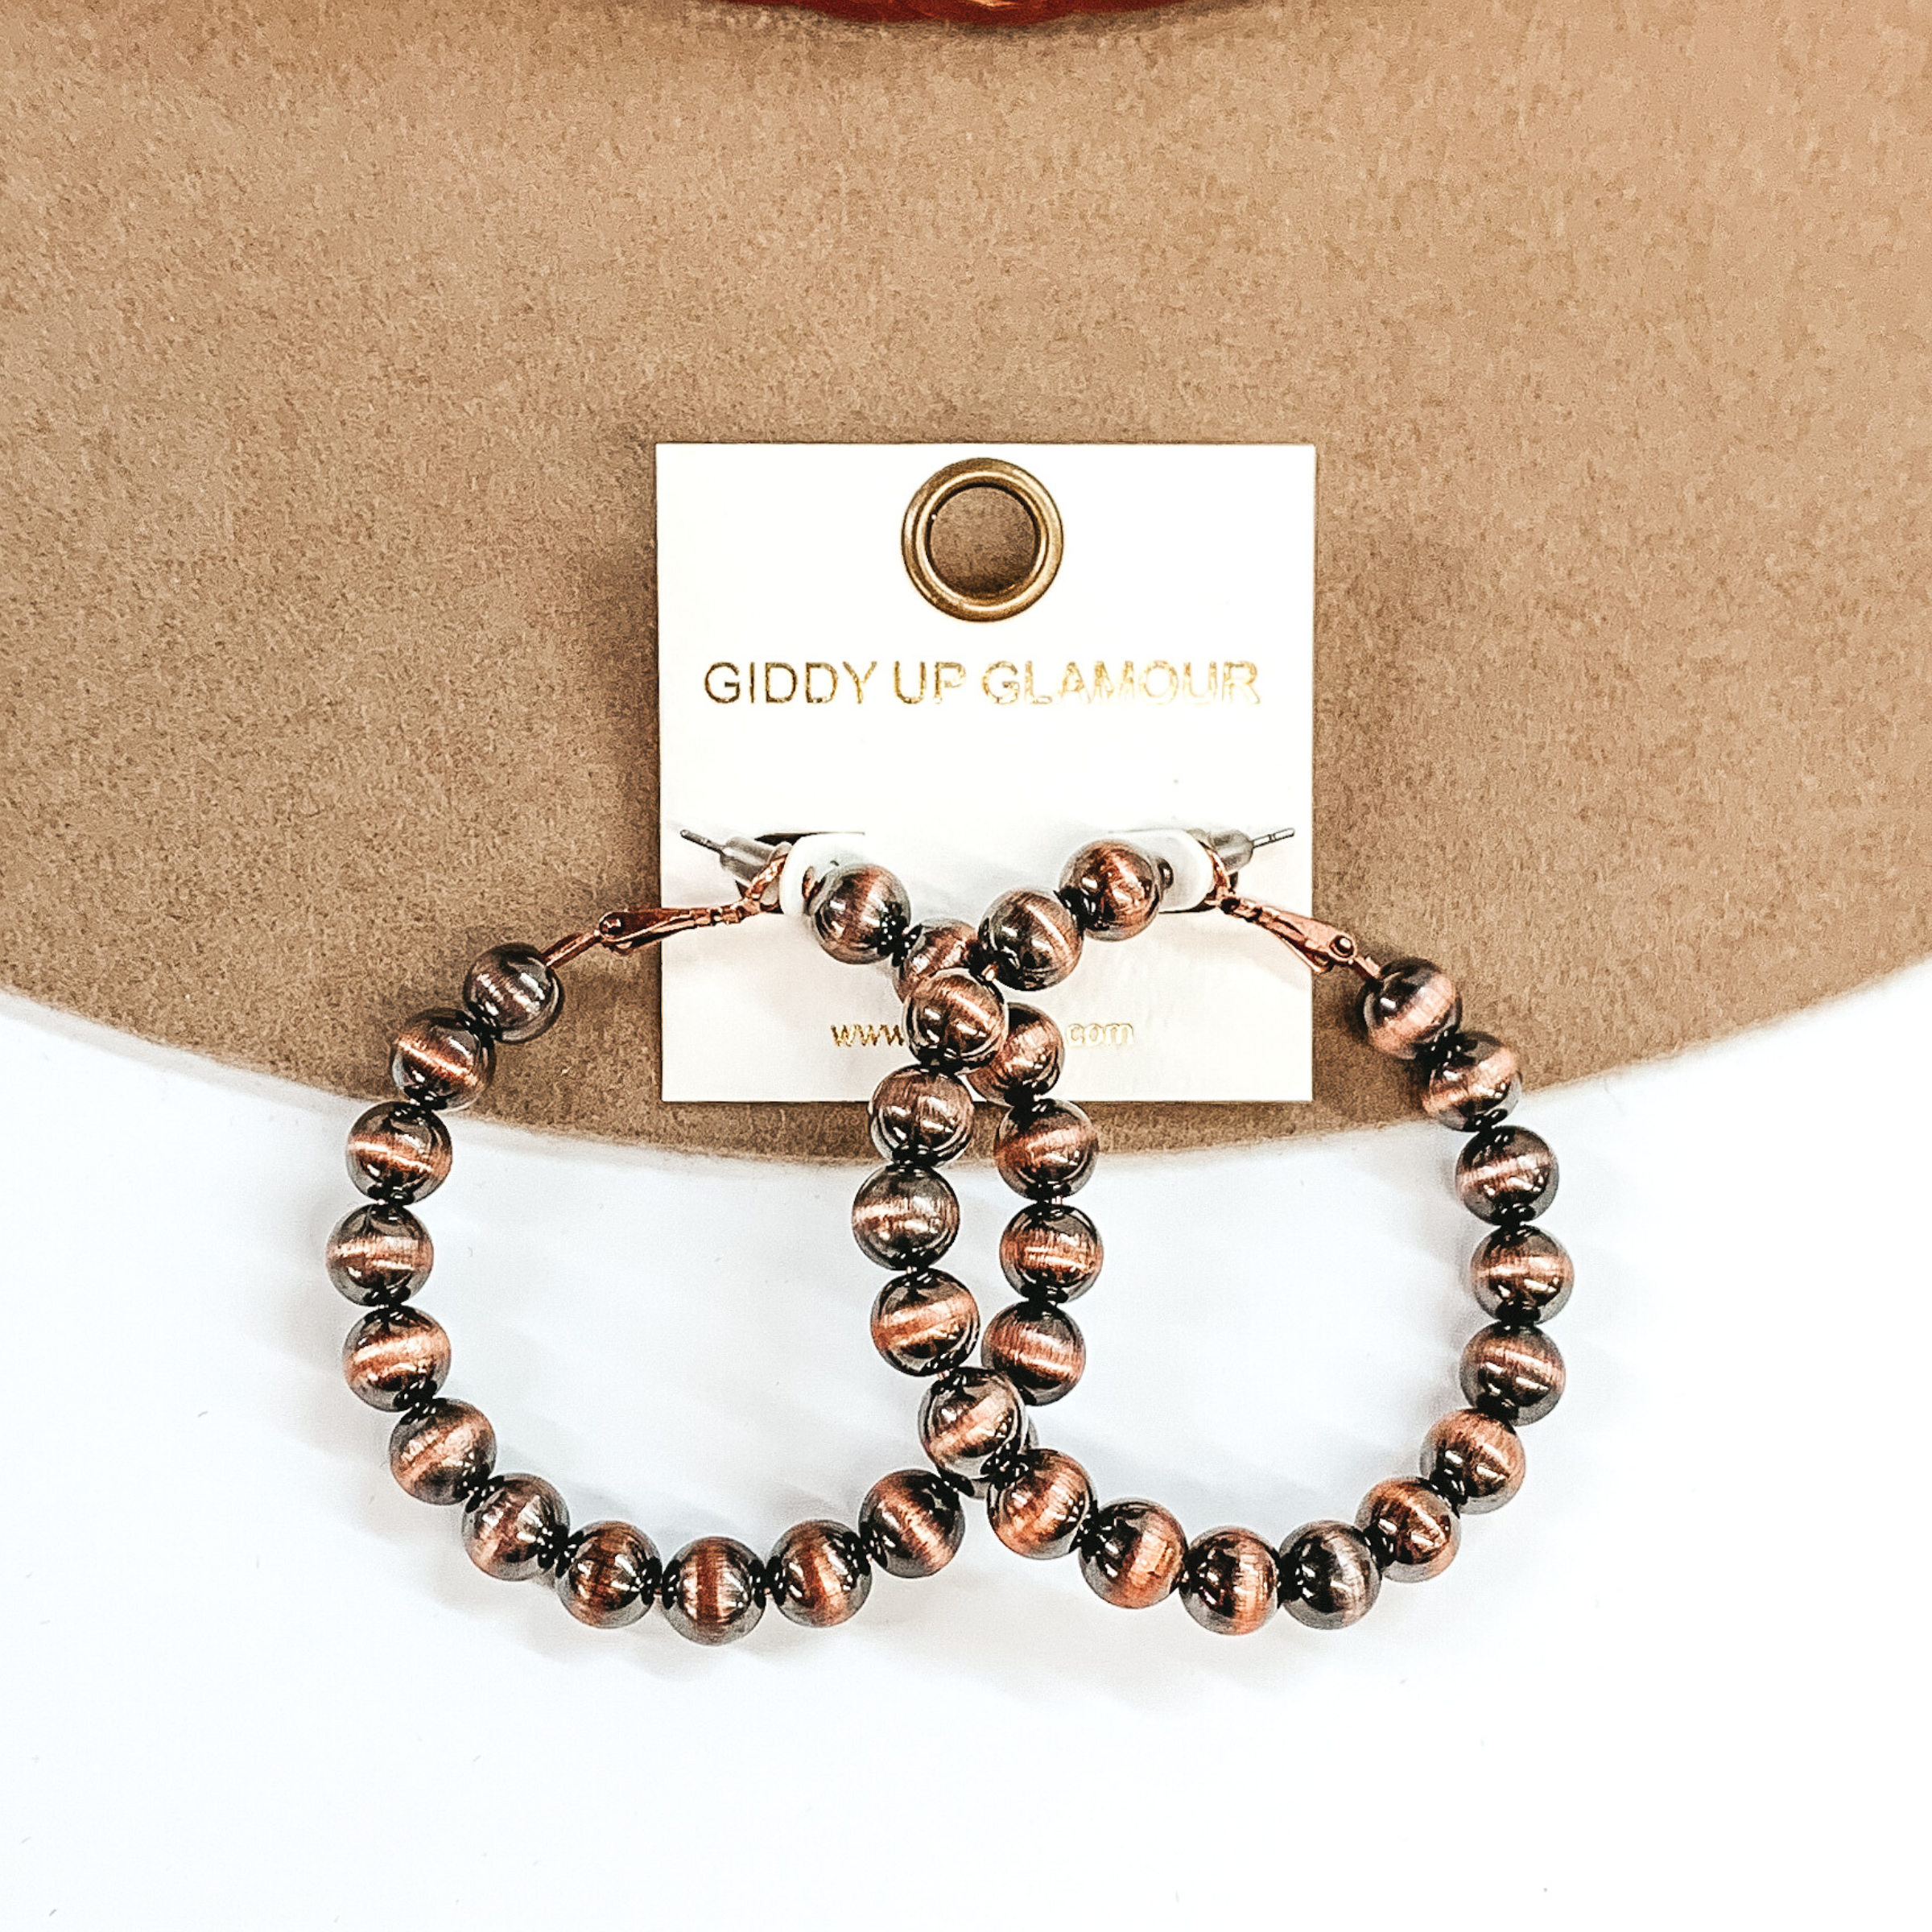 Copper beaded hoop earrings. These earrings are pictured on a tan and white background.